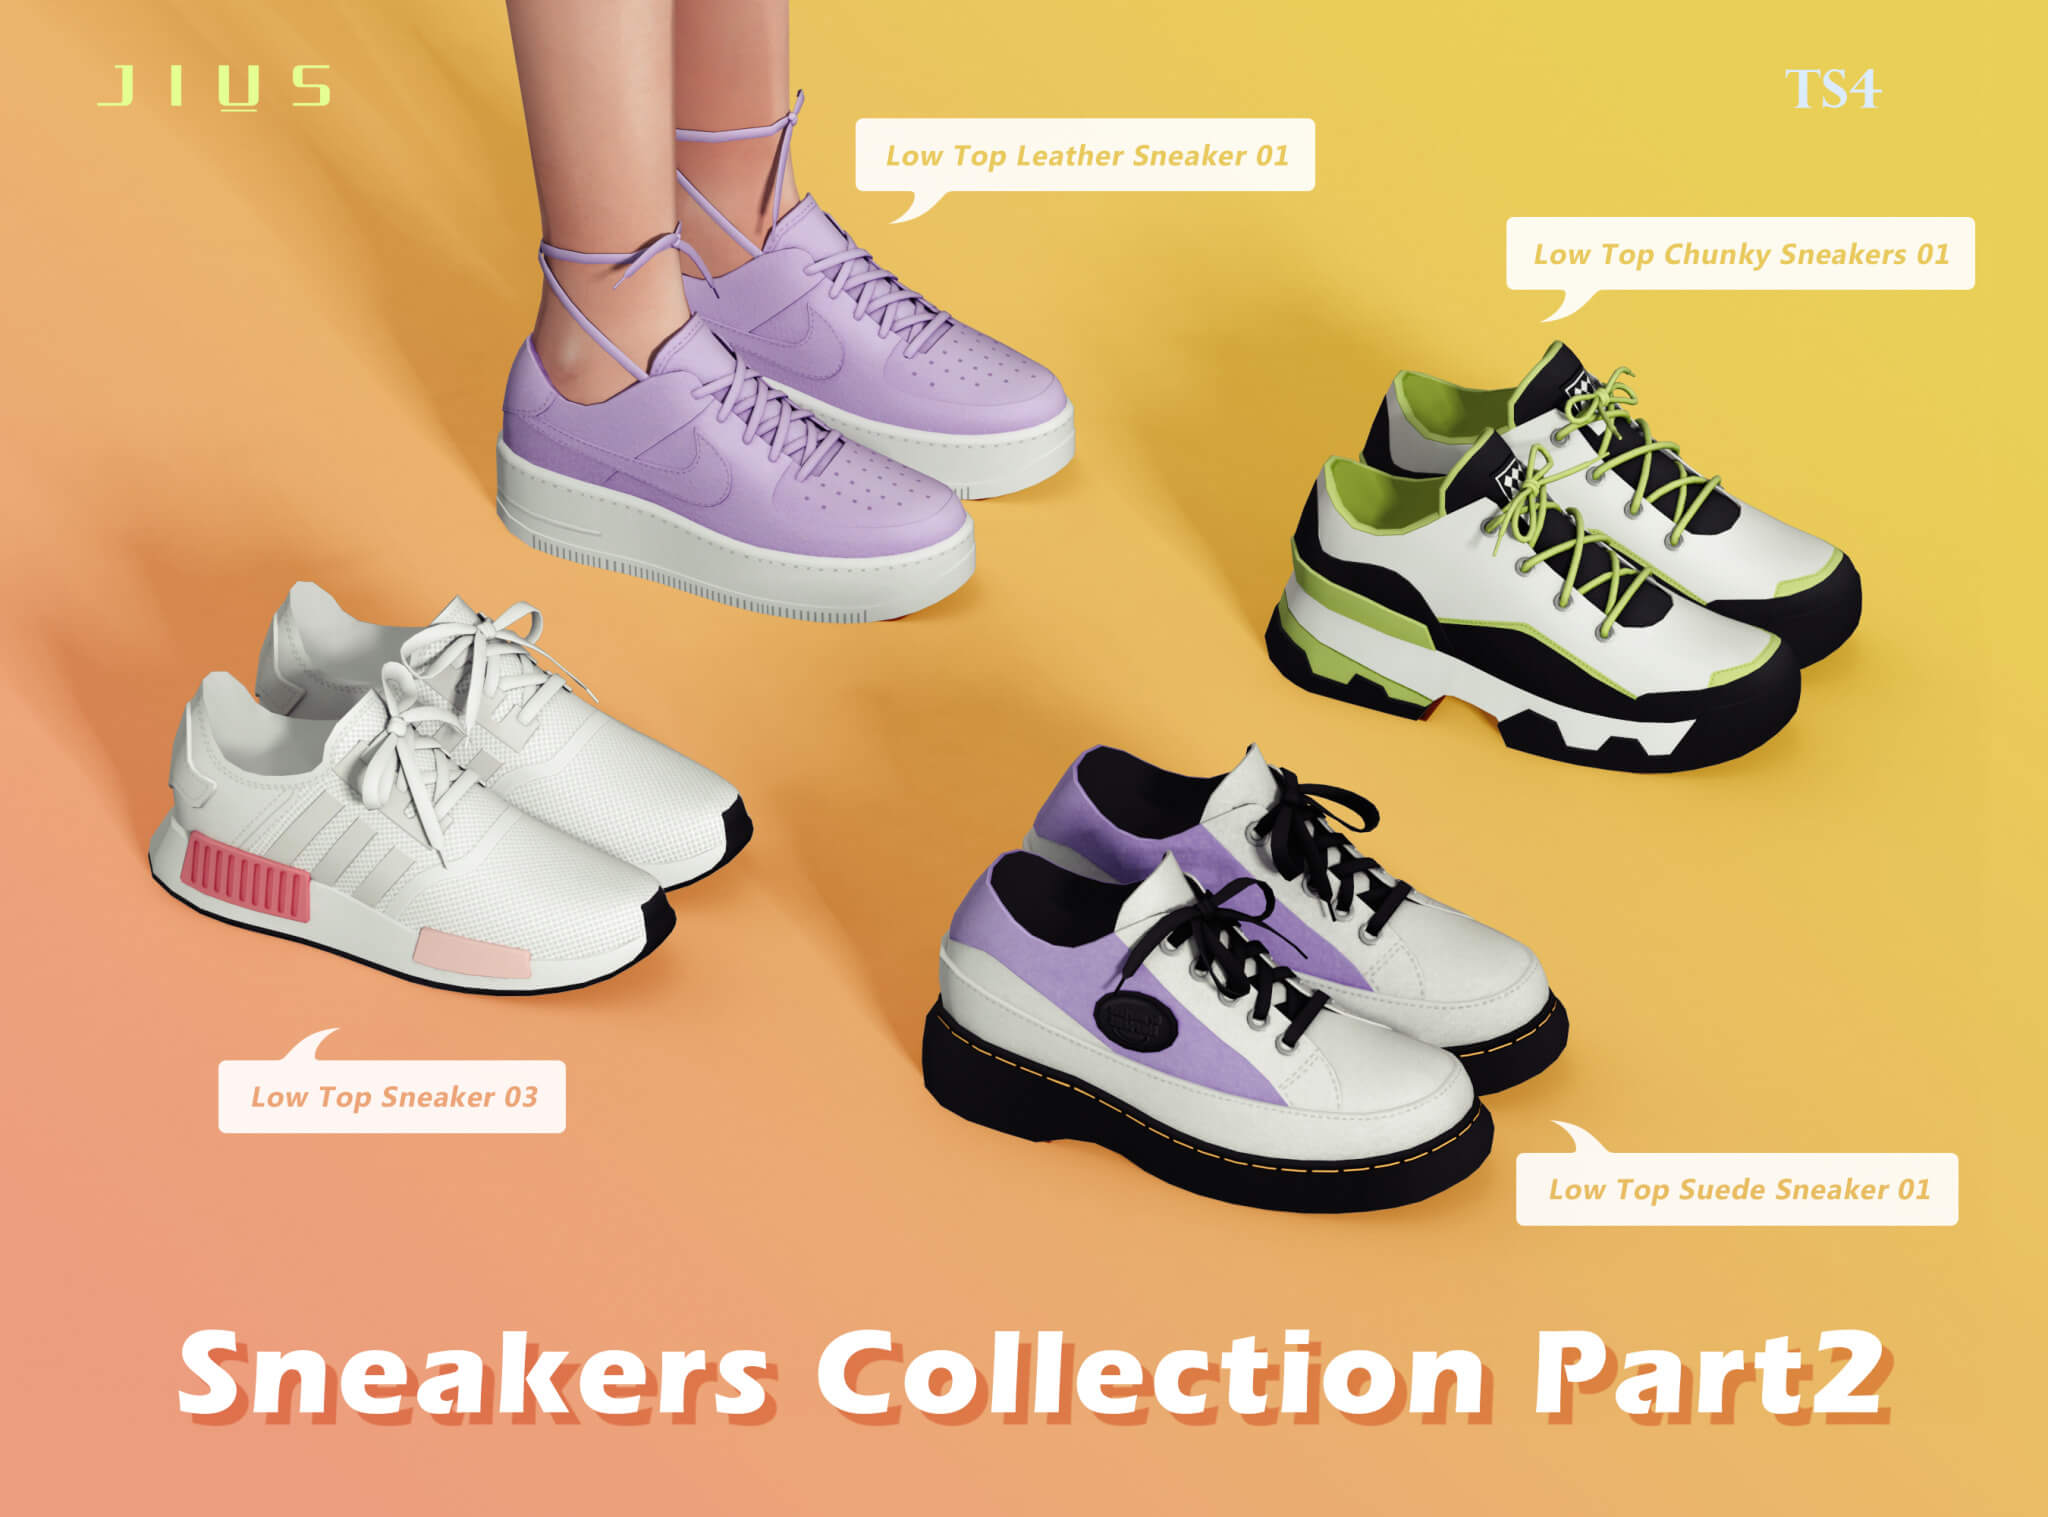 Cleanly molecule judge The Sims 4 sneakers collection part 2 | The Sims Book